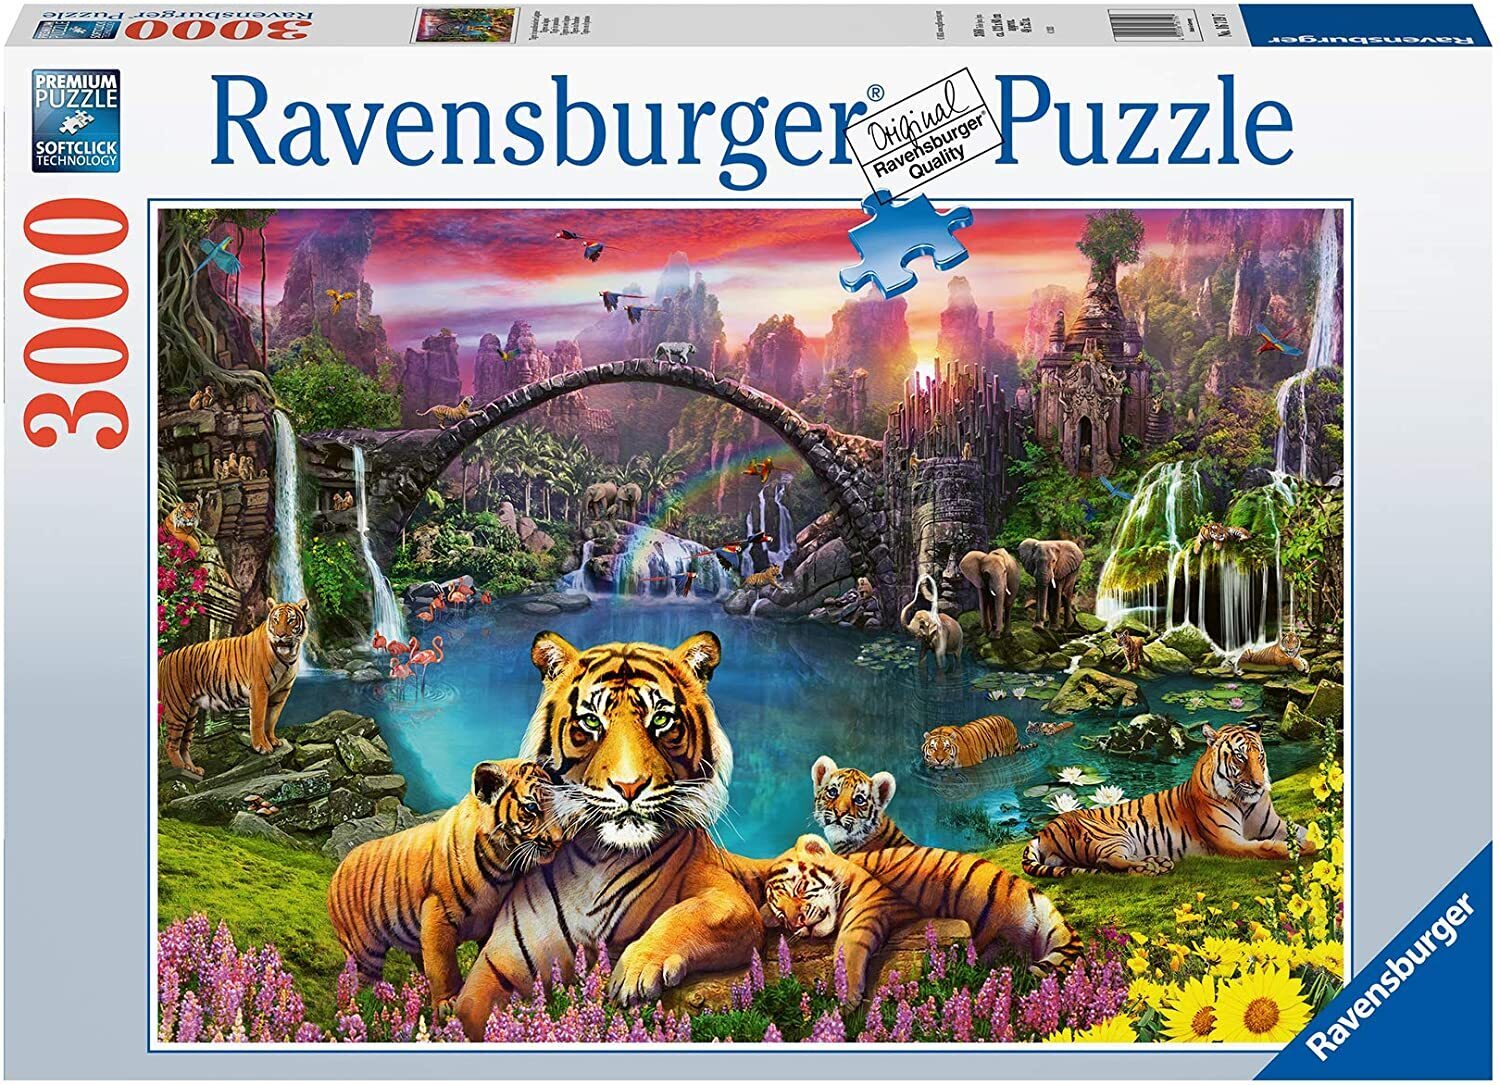 Ravensburger Tigers in Paradise 1000 Piece Jigsaw Puzzle